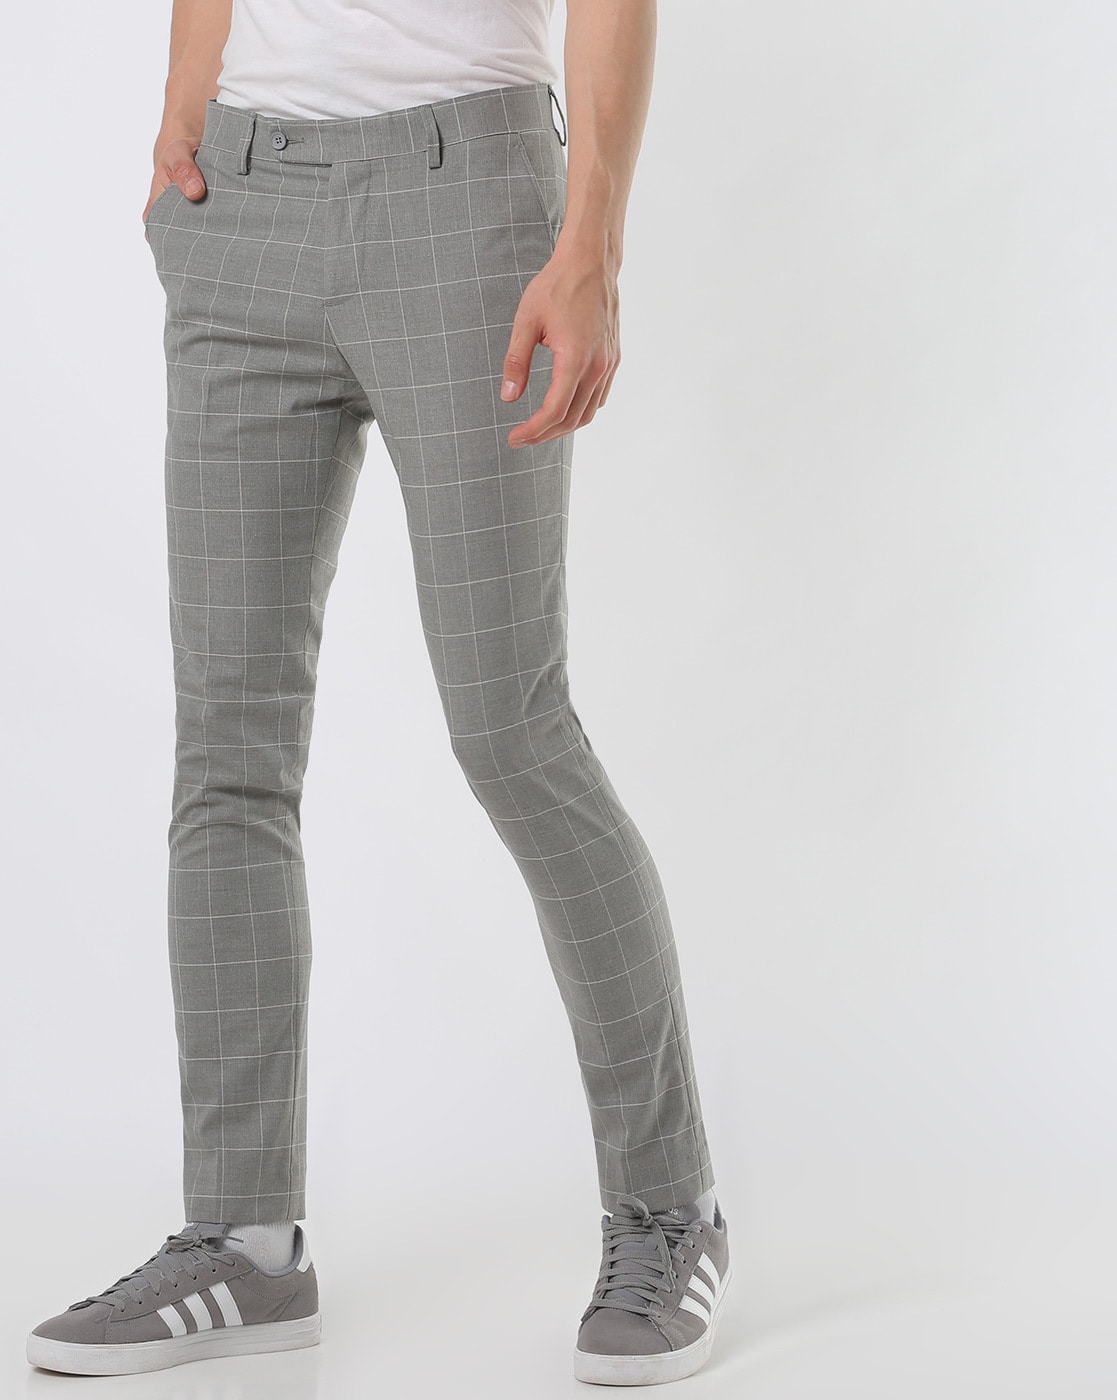 Selected Homme slim fit suit pants in light gray check | ASOS